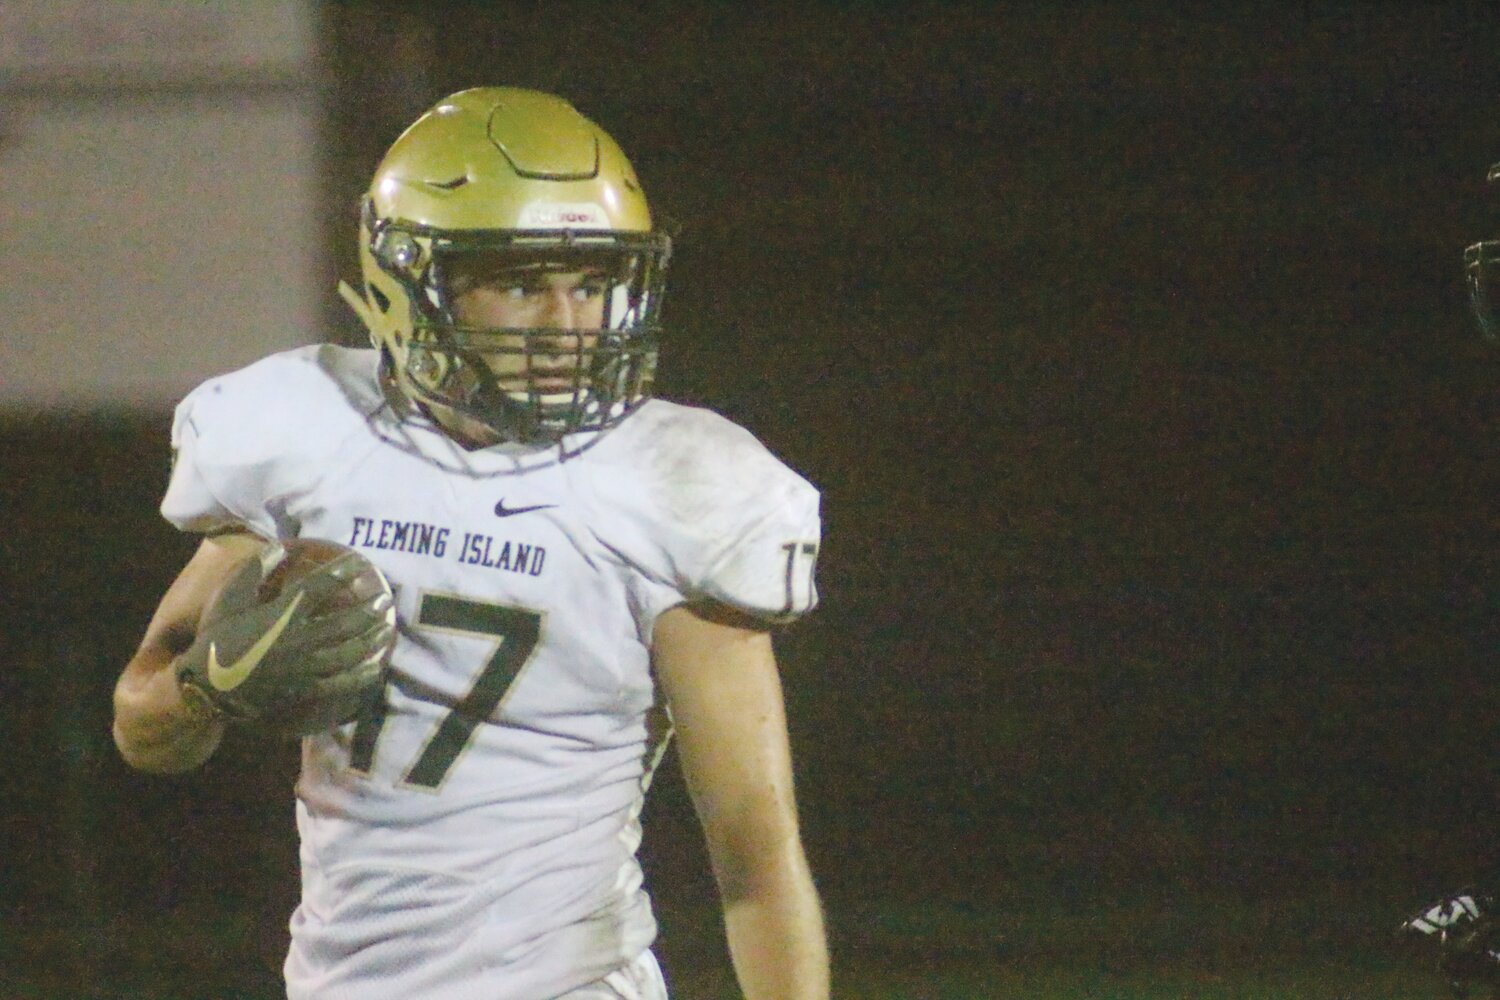 Fleming Island football standout Broden Domenico was a dynamic multi-faceted player for the Golden Eagles and recently earned a college All-Conference selection as a wide receiver at Shenandoah University in Virginia.